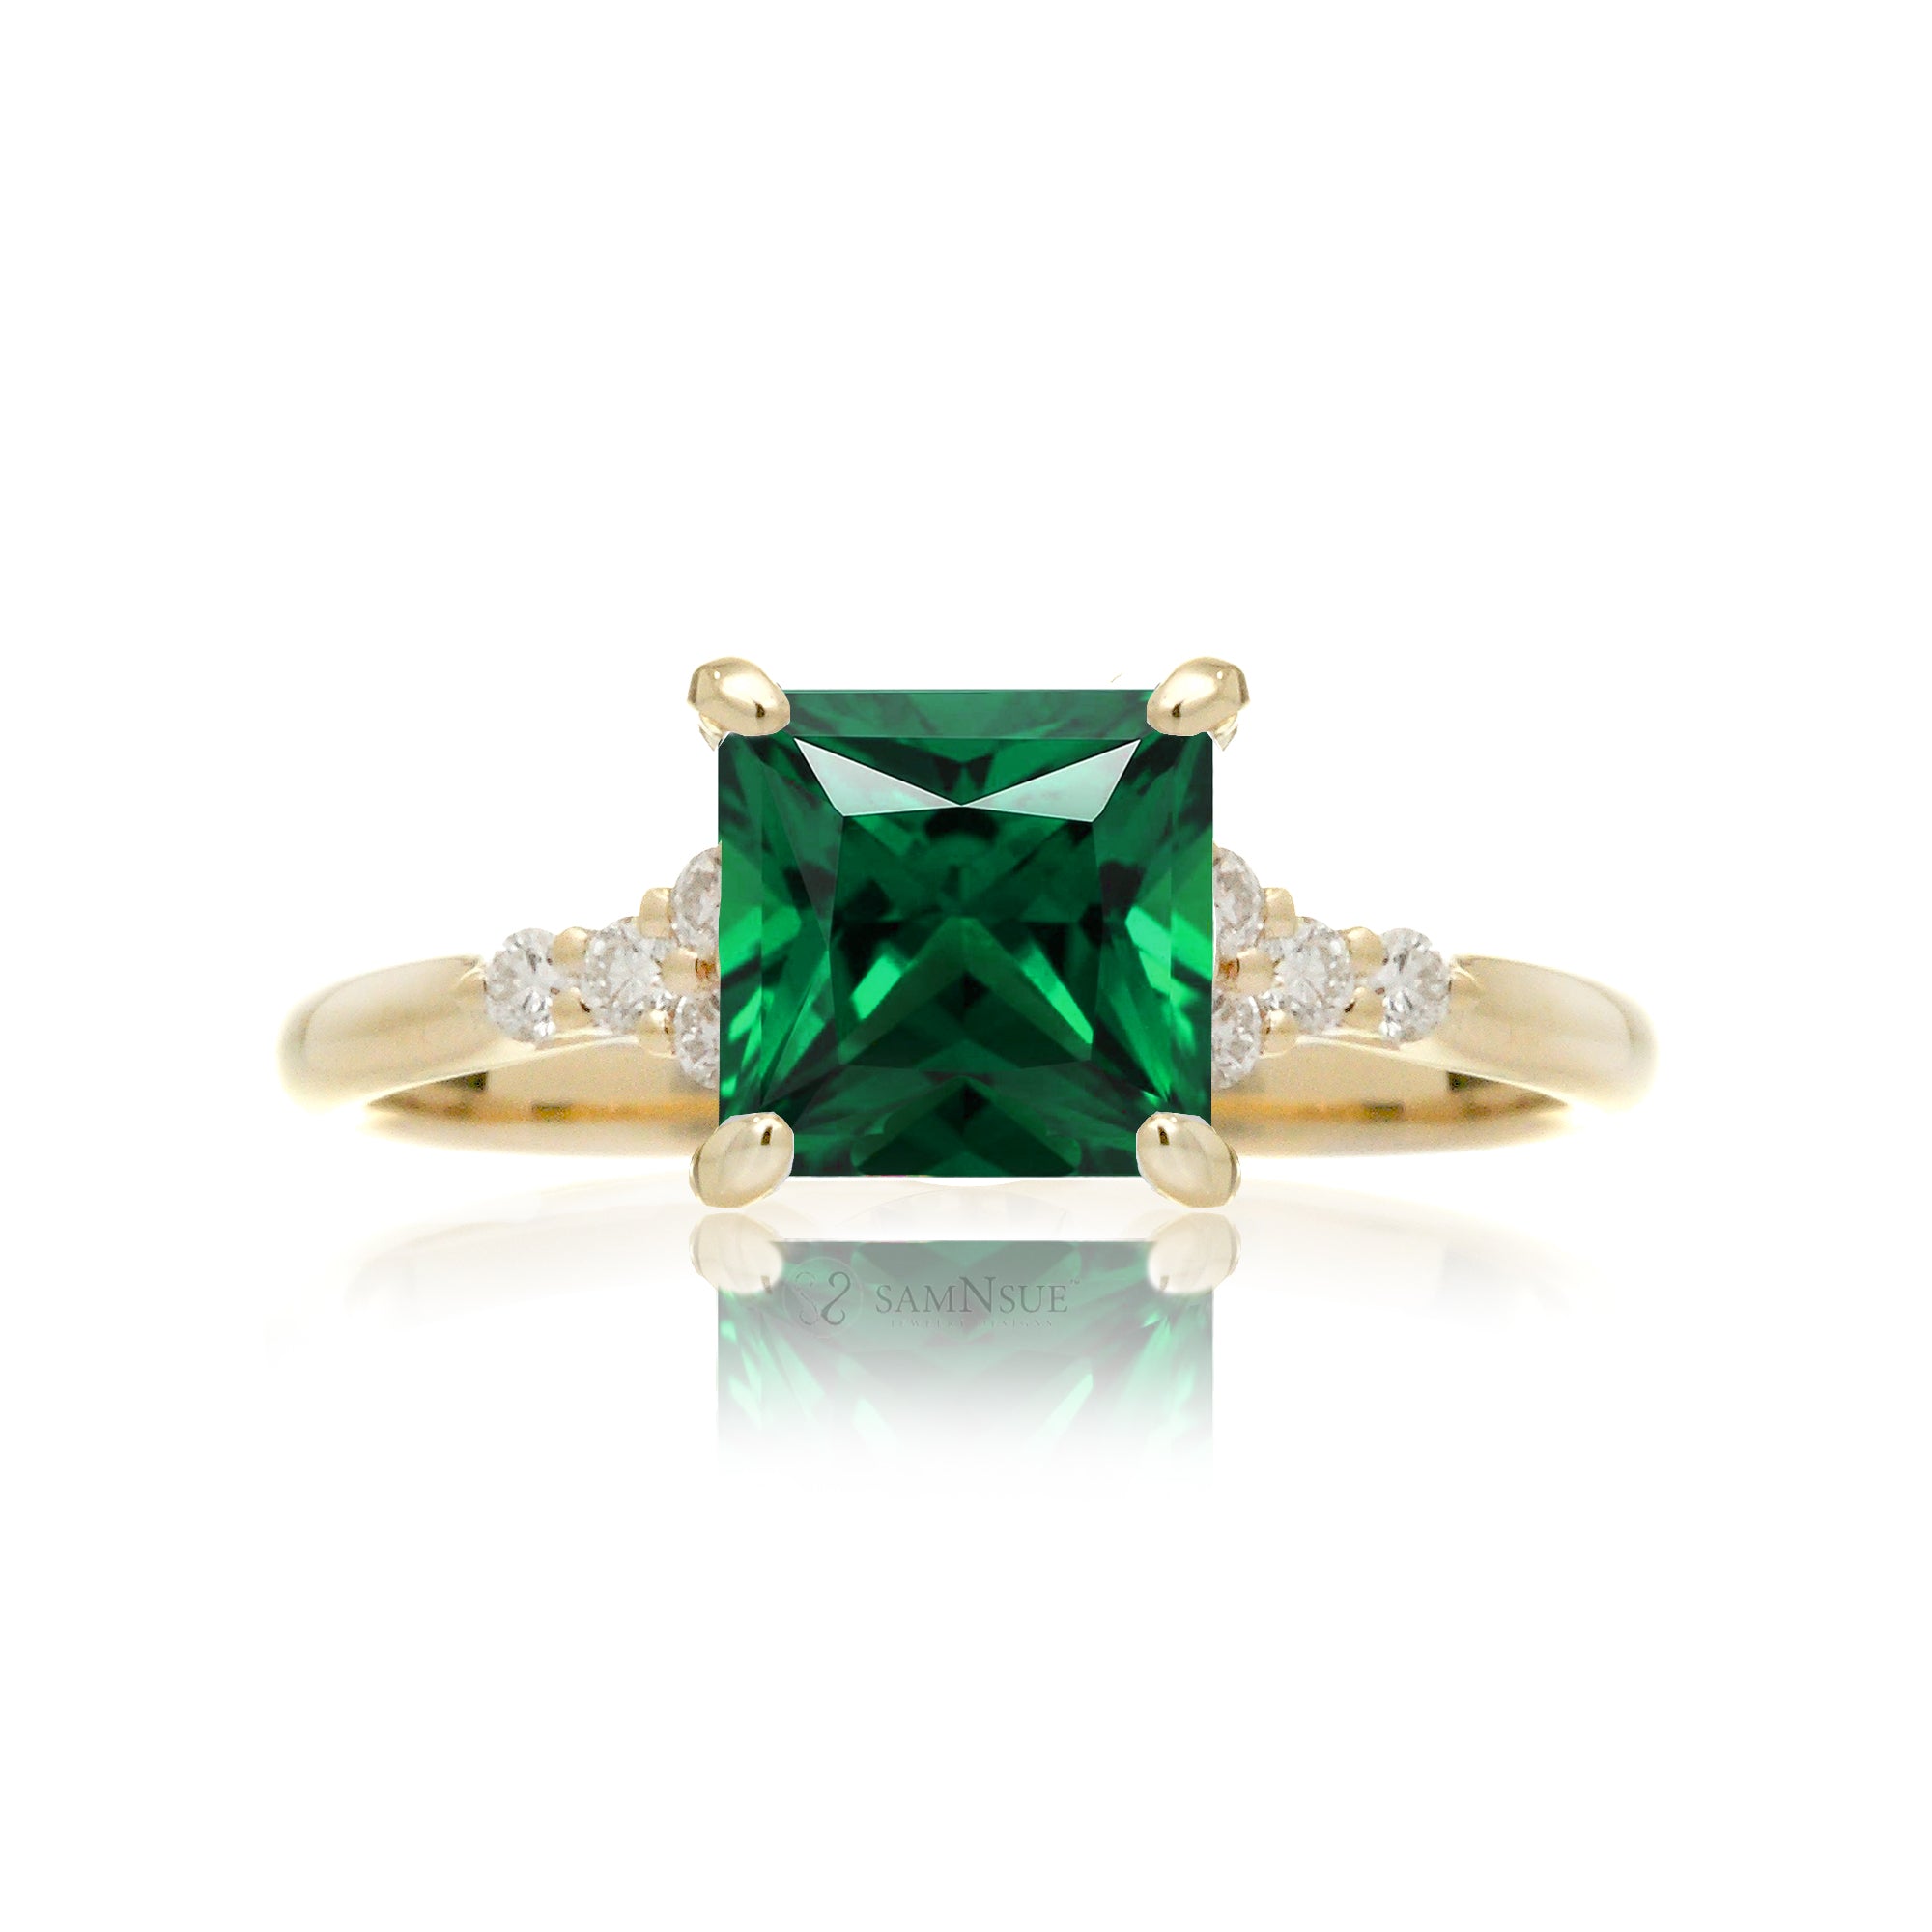 Emerald engagement ring with princess cut and diamond accent in yellow gold